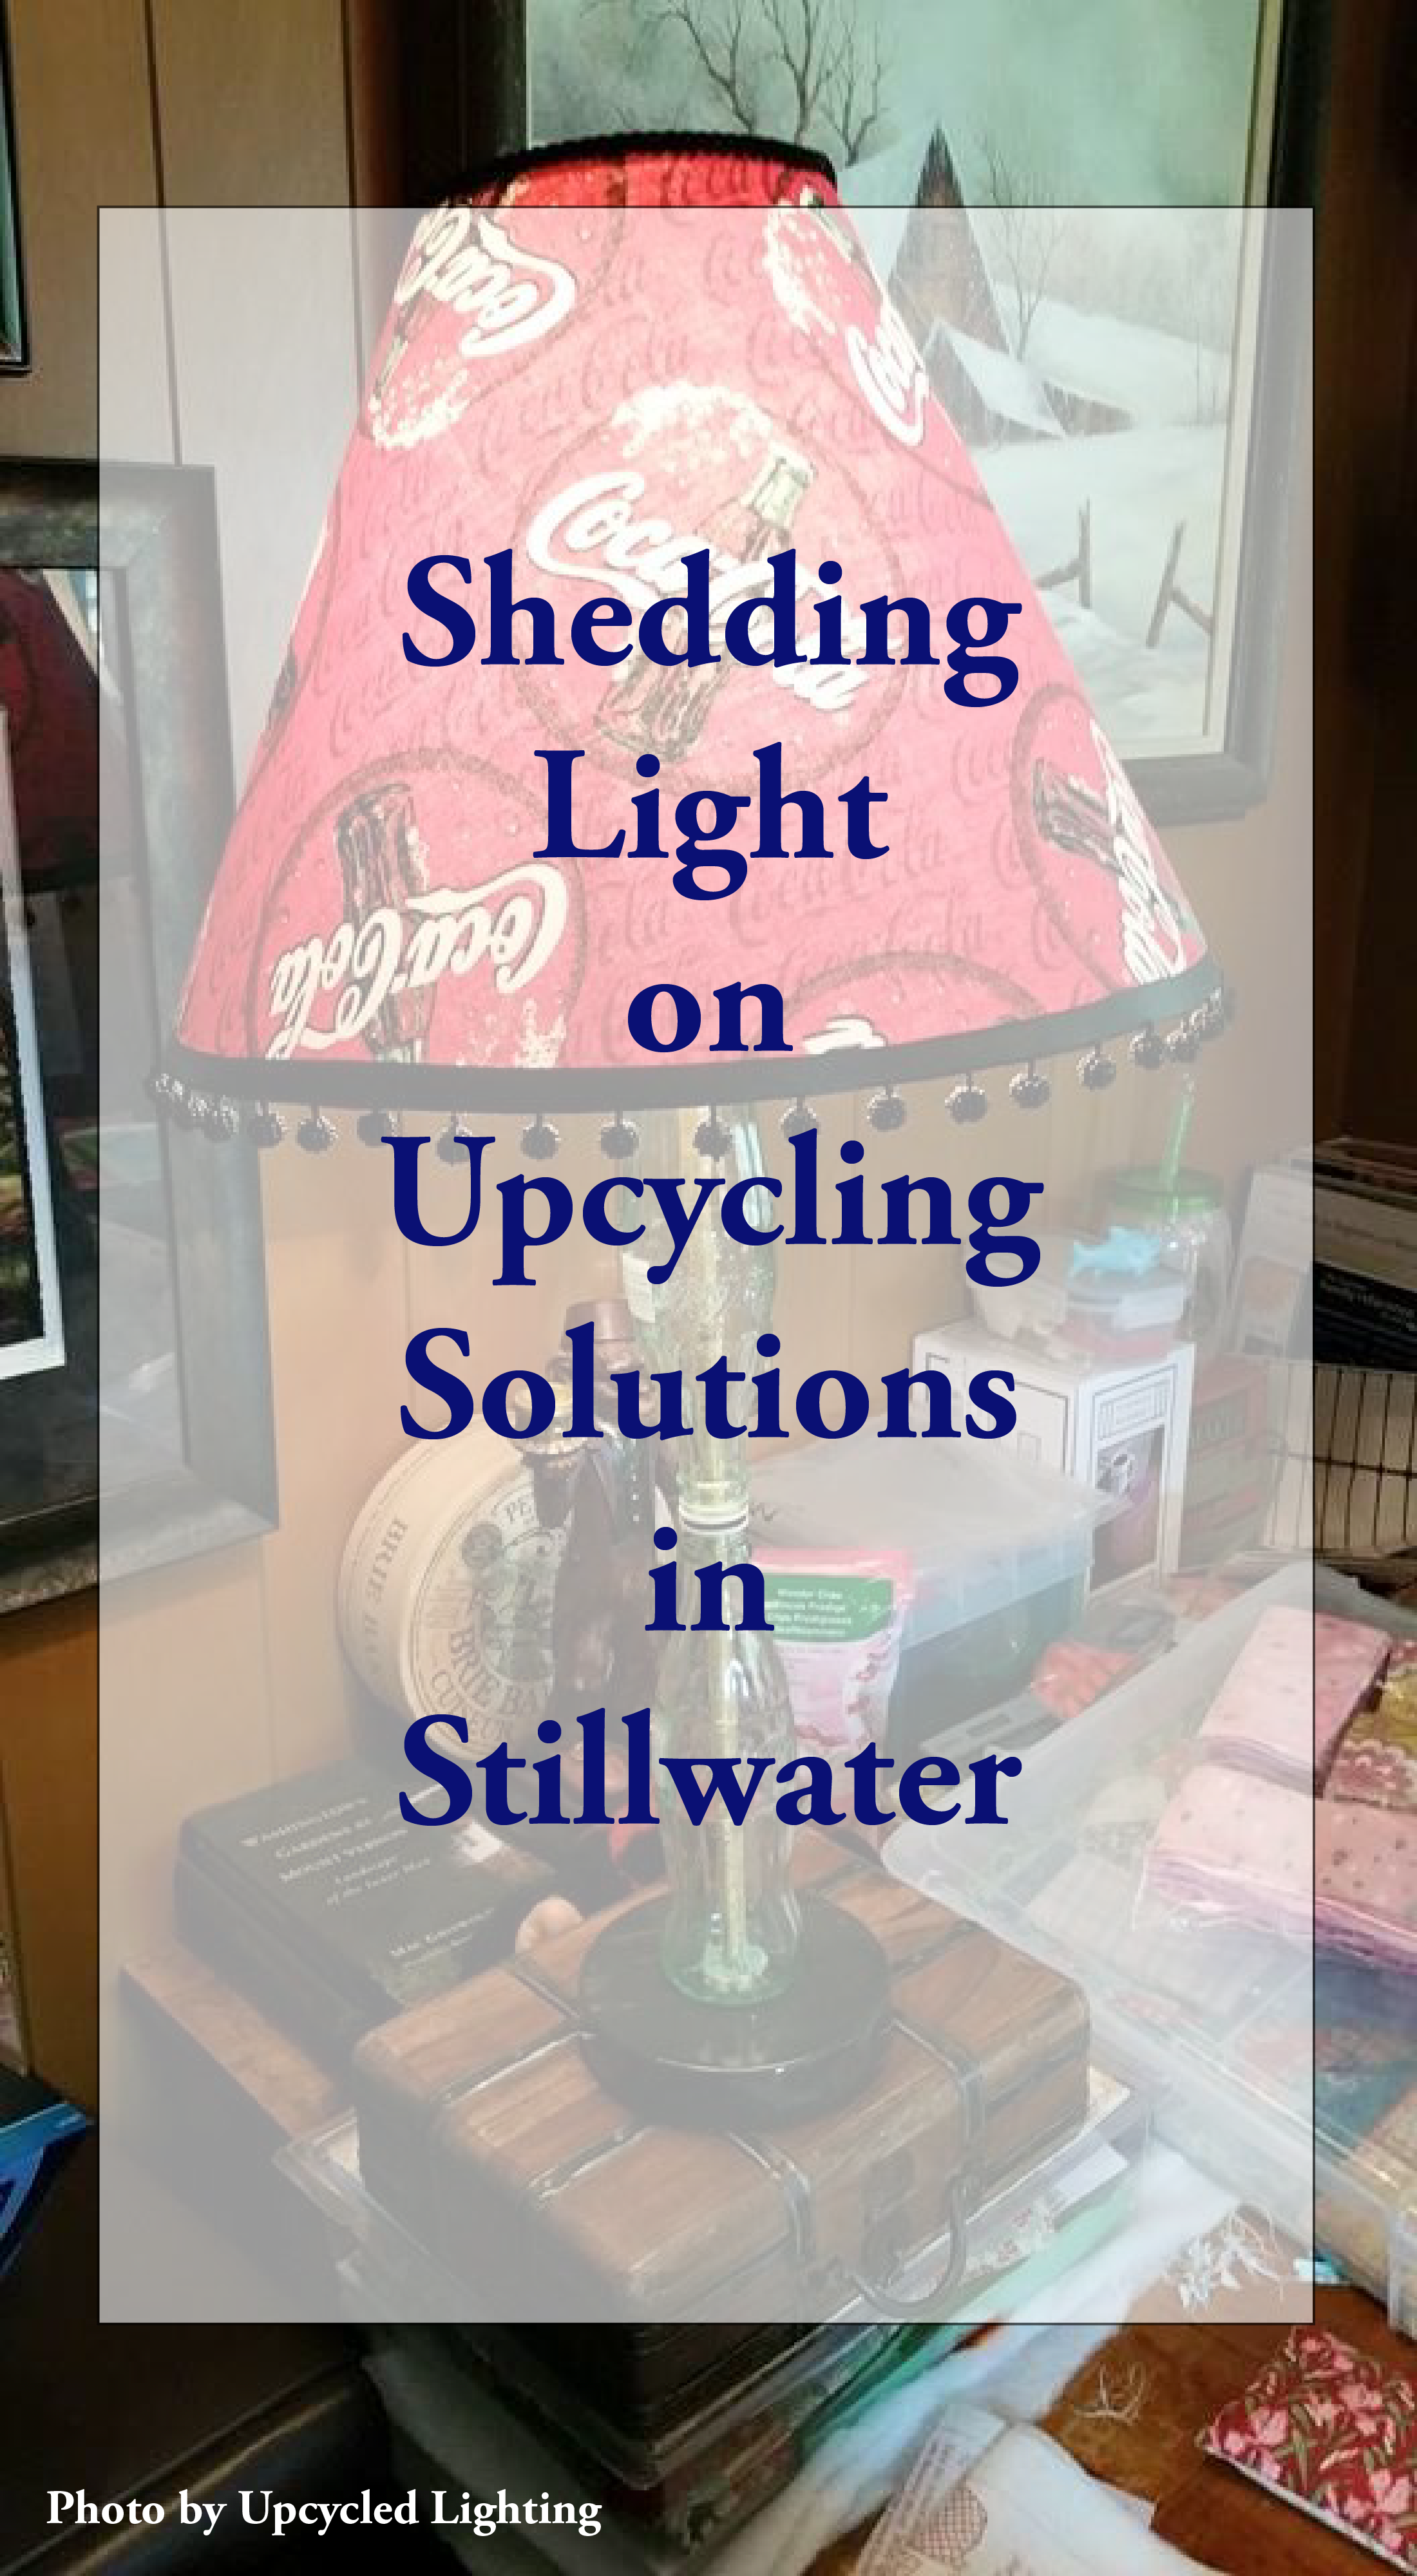 Shedding Light on Upcycling Solutions in Stillwater